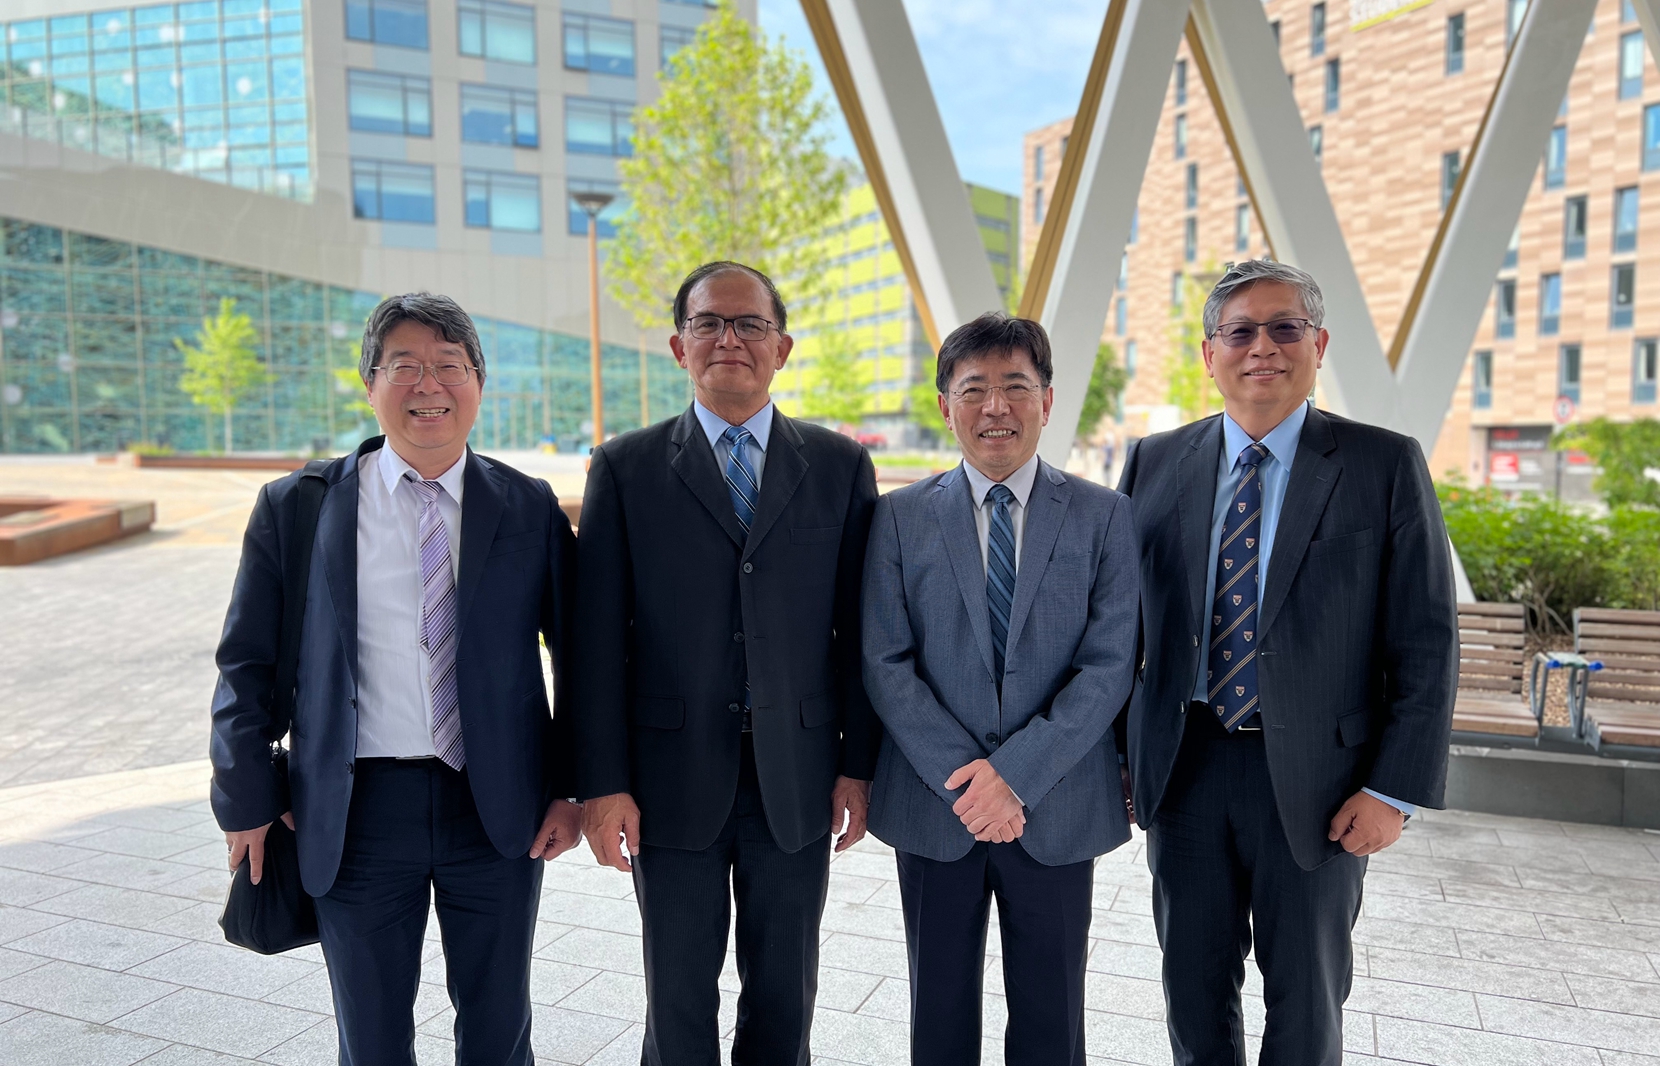 ITRI executives: (From left) European Representative Yu-Liang Chung, Executive Vice President Jwu-Sheng Hu, President Edwin Liu, General Director of Industry, Science and Technology International Strategy Center Jeff Lin.